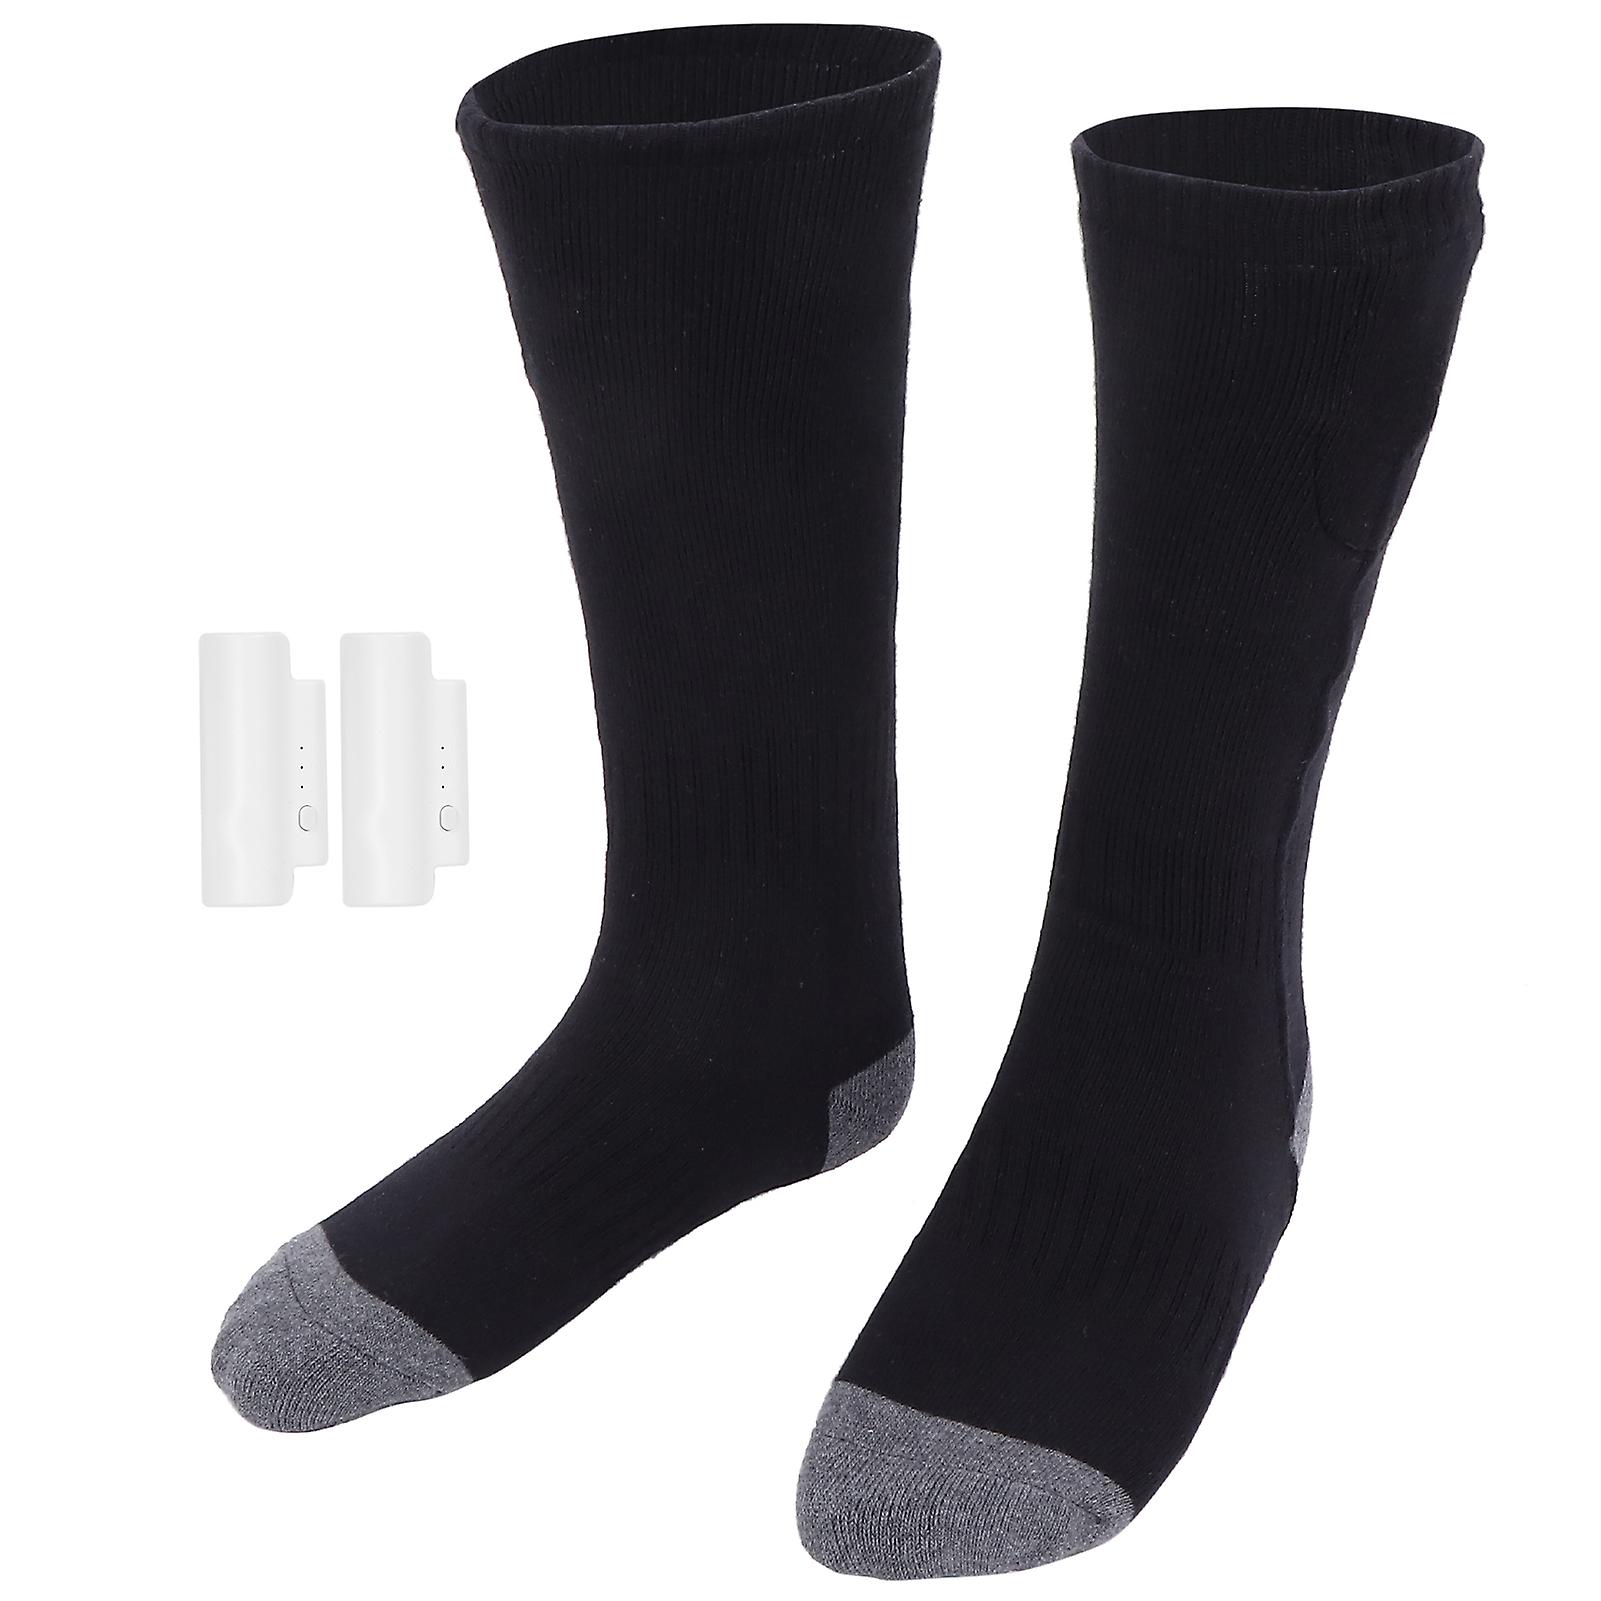 Winter Outdoor Sports Skiing Heated Socks Electric Smart Heating Cotton Stockingsblack